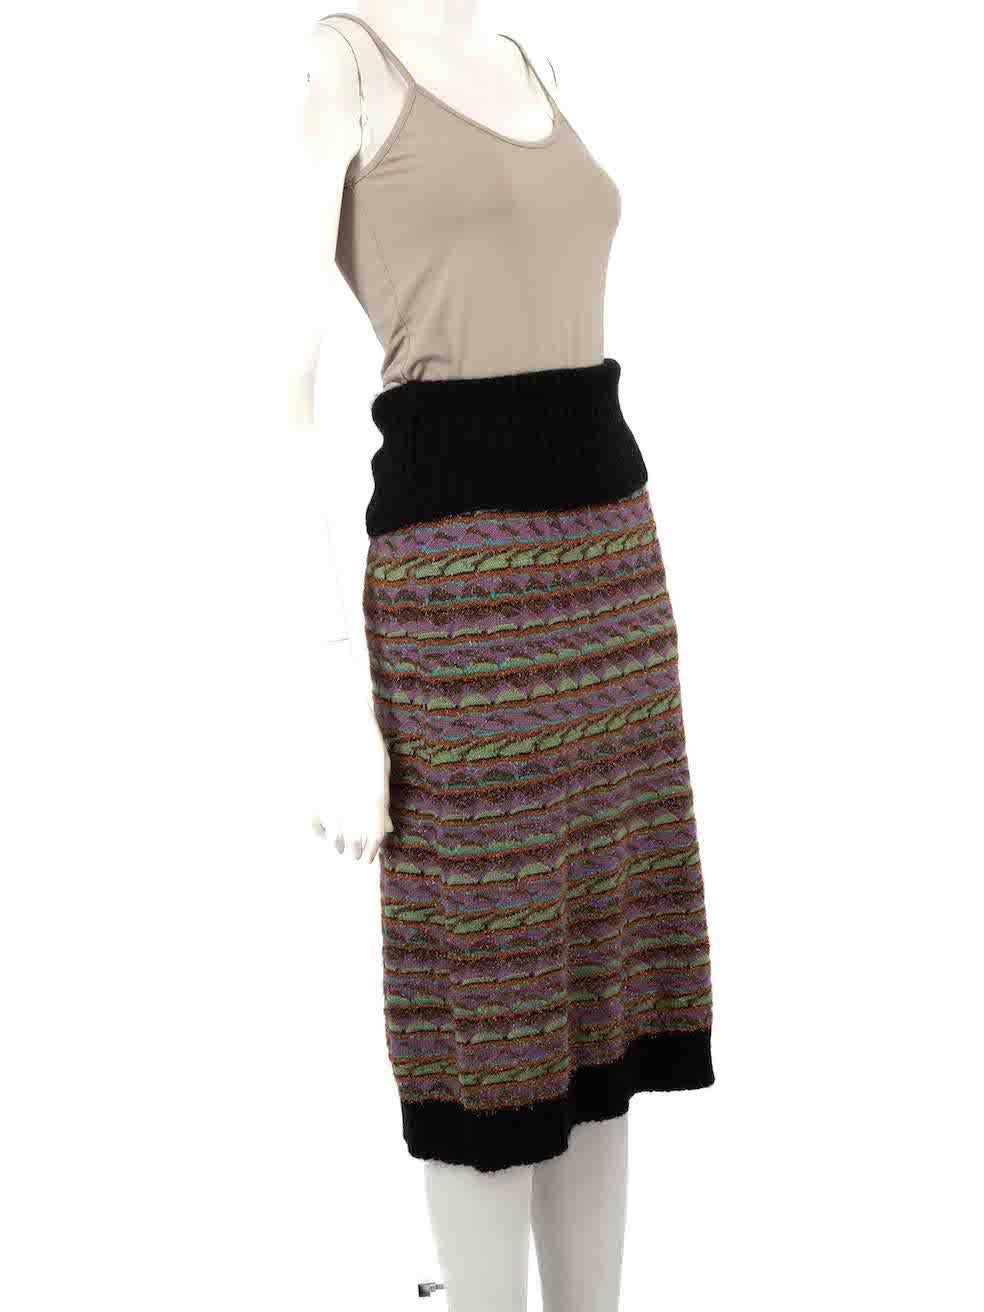 CONDITION is Very good. Hardly any visible wear to skirt is evident on this used M Missoni designer resale item.
 
 
 
 Details
 
 
 Multicolour - Purple, black and green
 
 Wool
 
 Knee length skirt
 
 Knitted and stretchy
 
 Patterned
 
 
 
 
 
